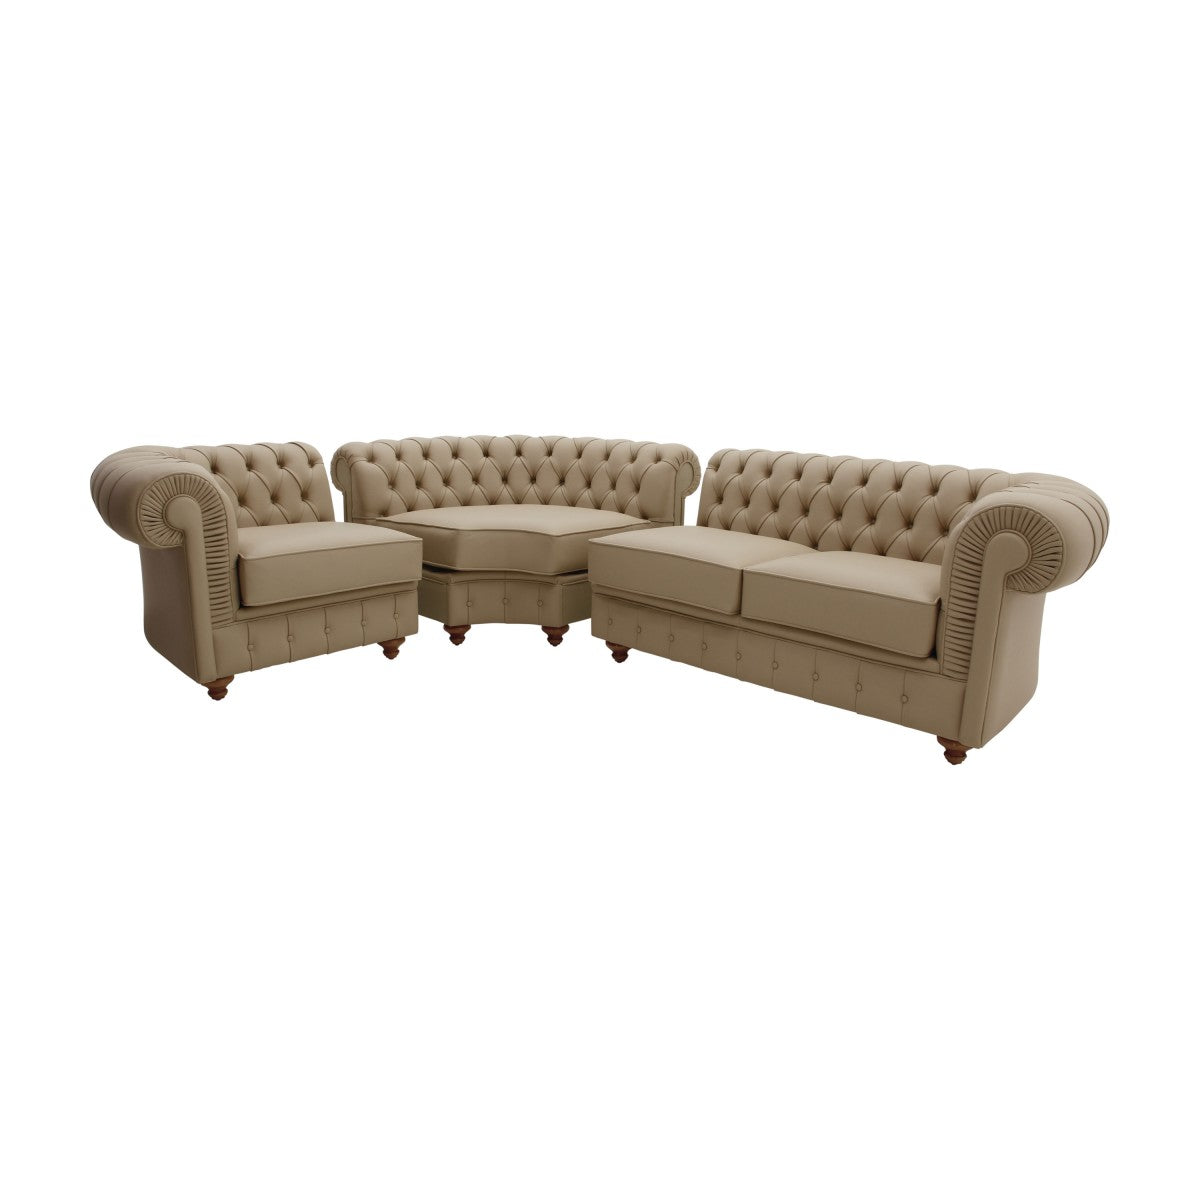 Custom Bespoke Upholstered Curved Modular Chesterfield Style Extra Large Sofa MS019 Custom Made To Order